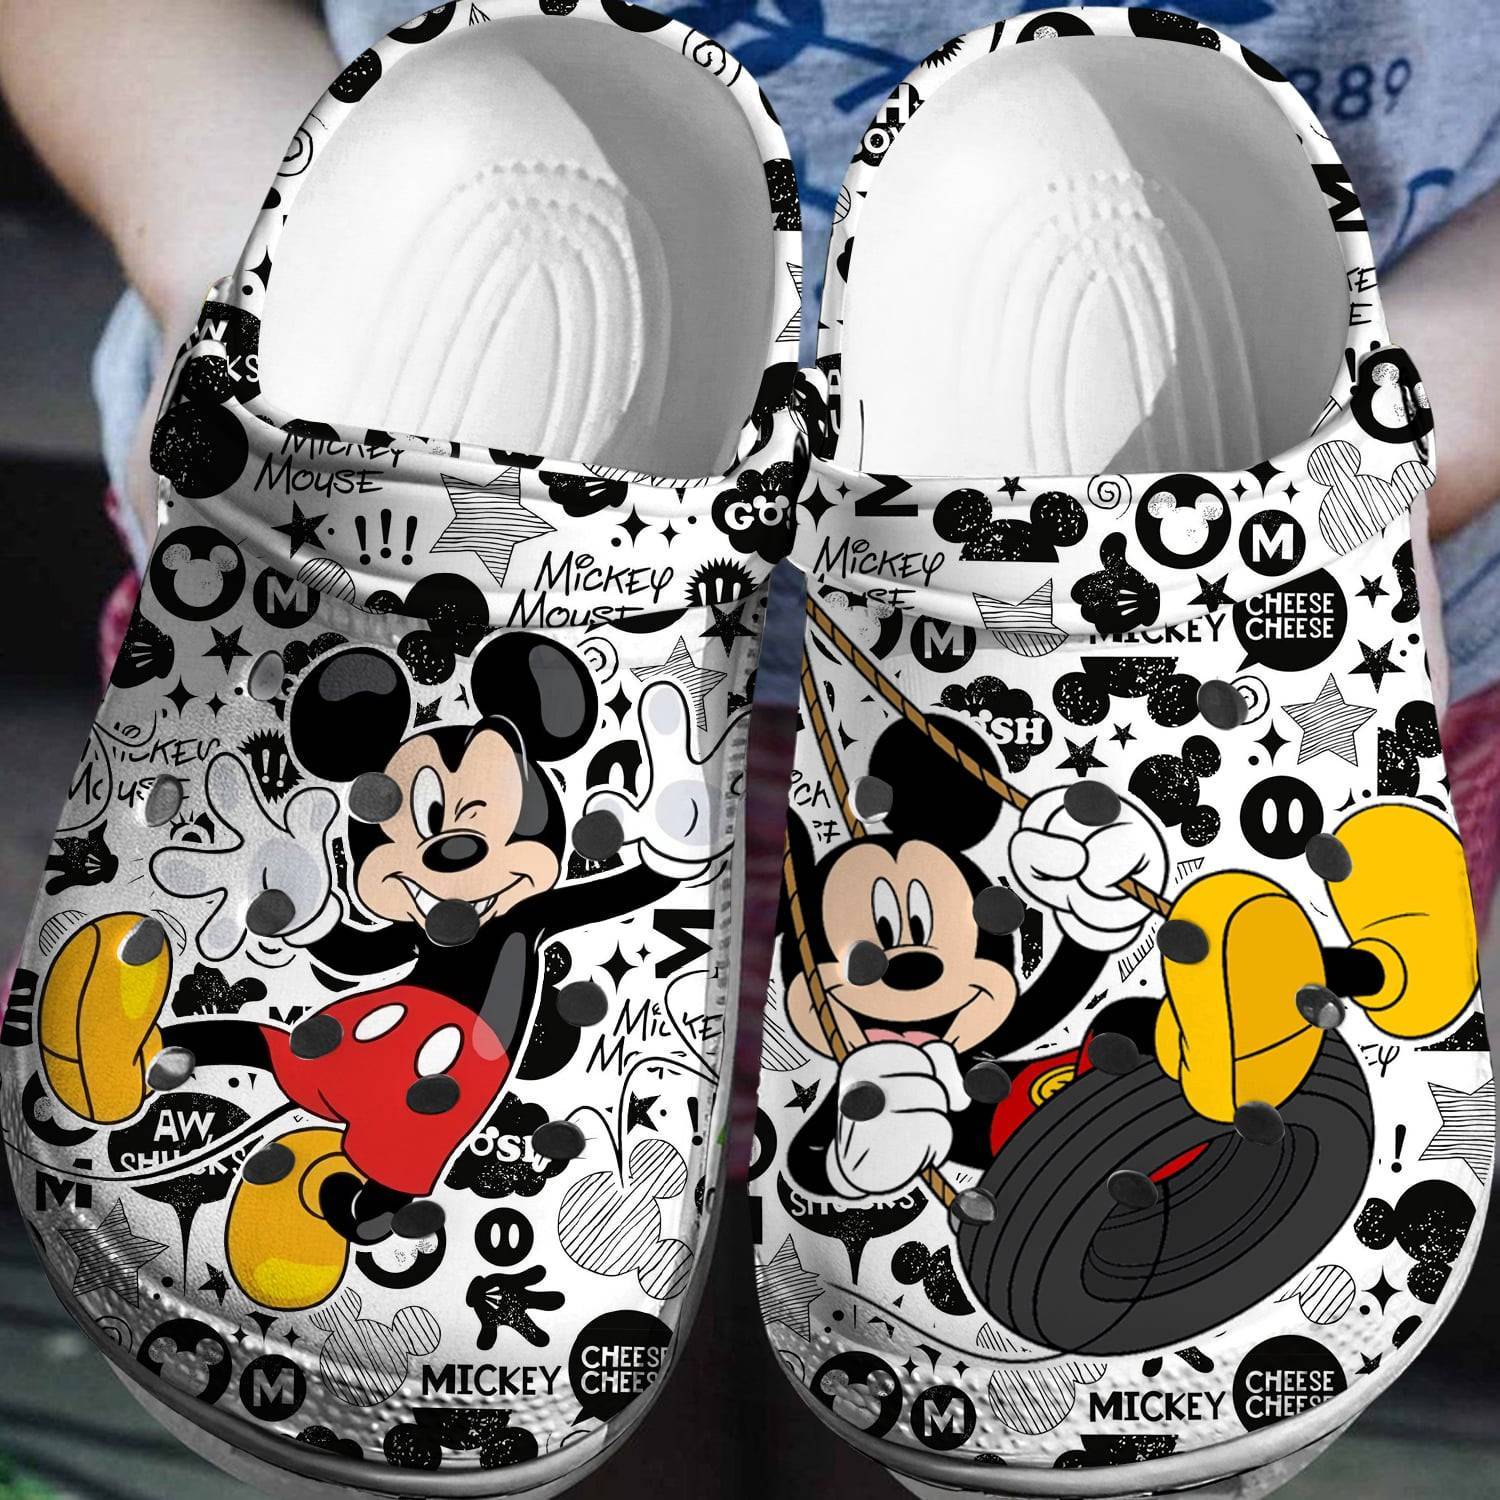 Magical Moments with Mickey: Customizable 3D Clog Shoes for a Disney – Inspired Look